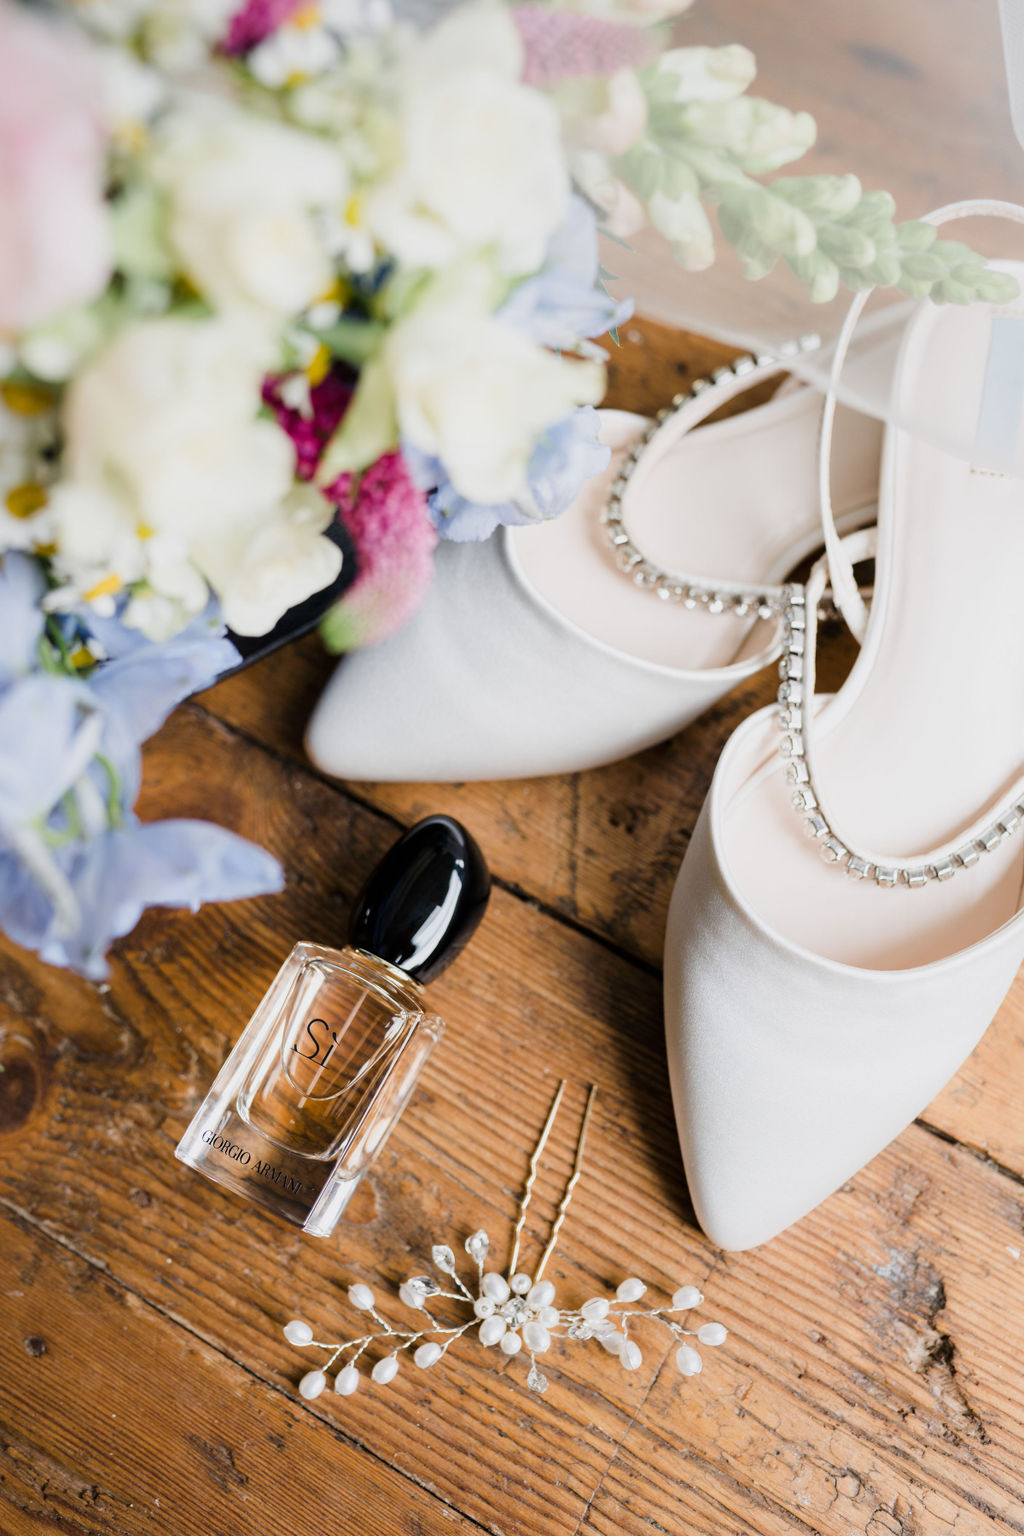 Upton Barn and Walled Gardens wedding flowers, shoes and perfume.